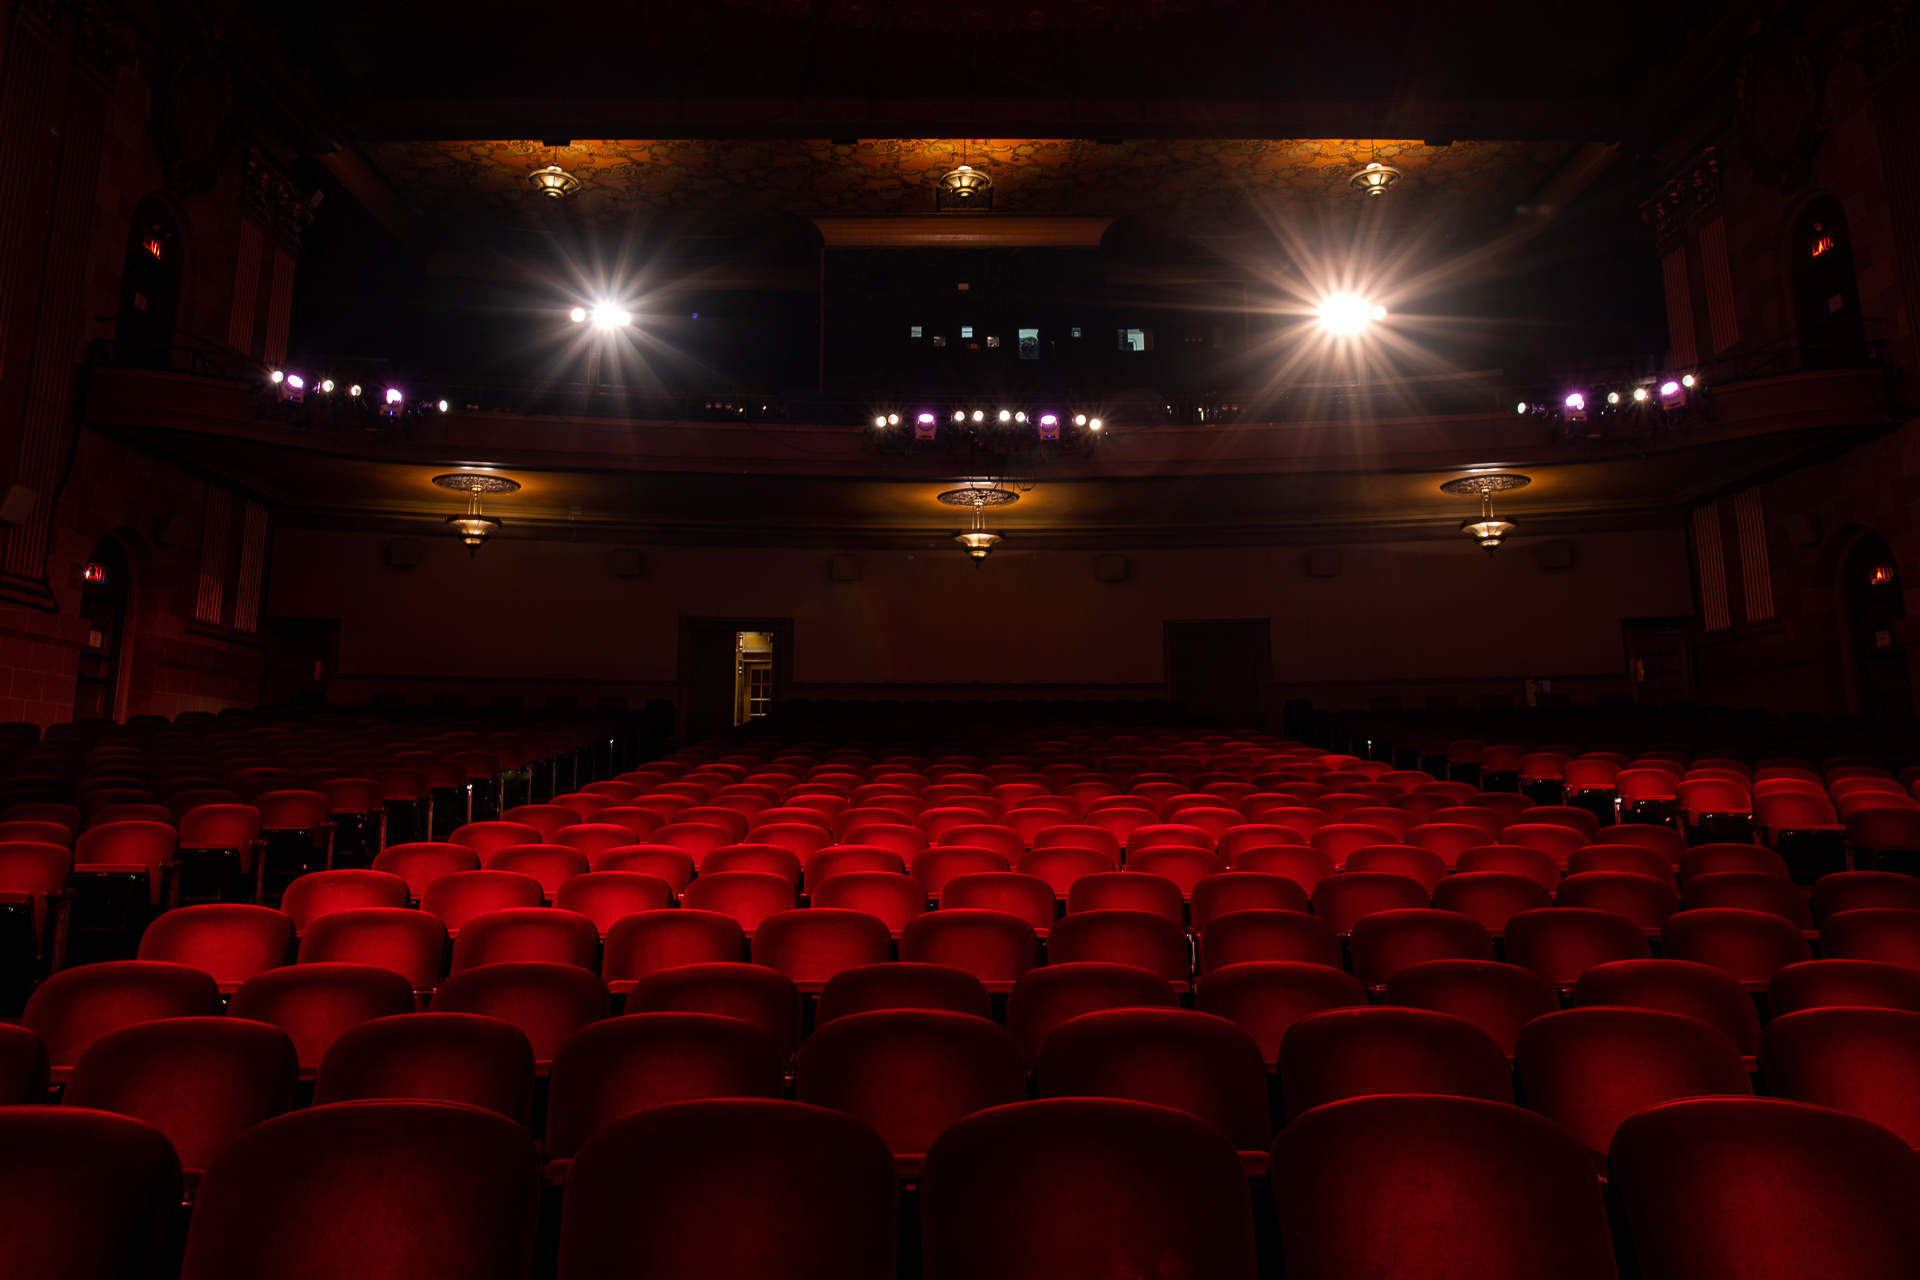 Rows of red velvet seats in a dimmed theater.